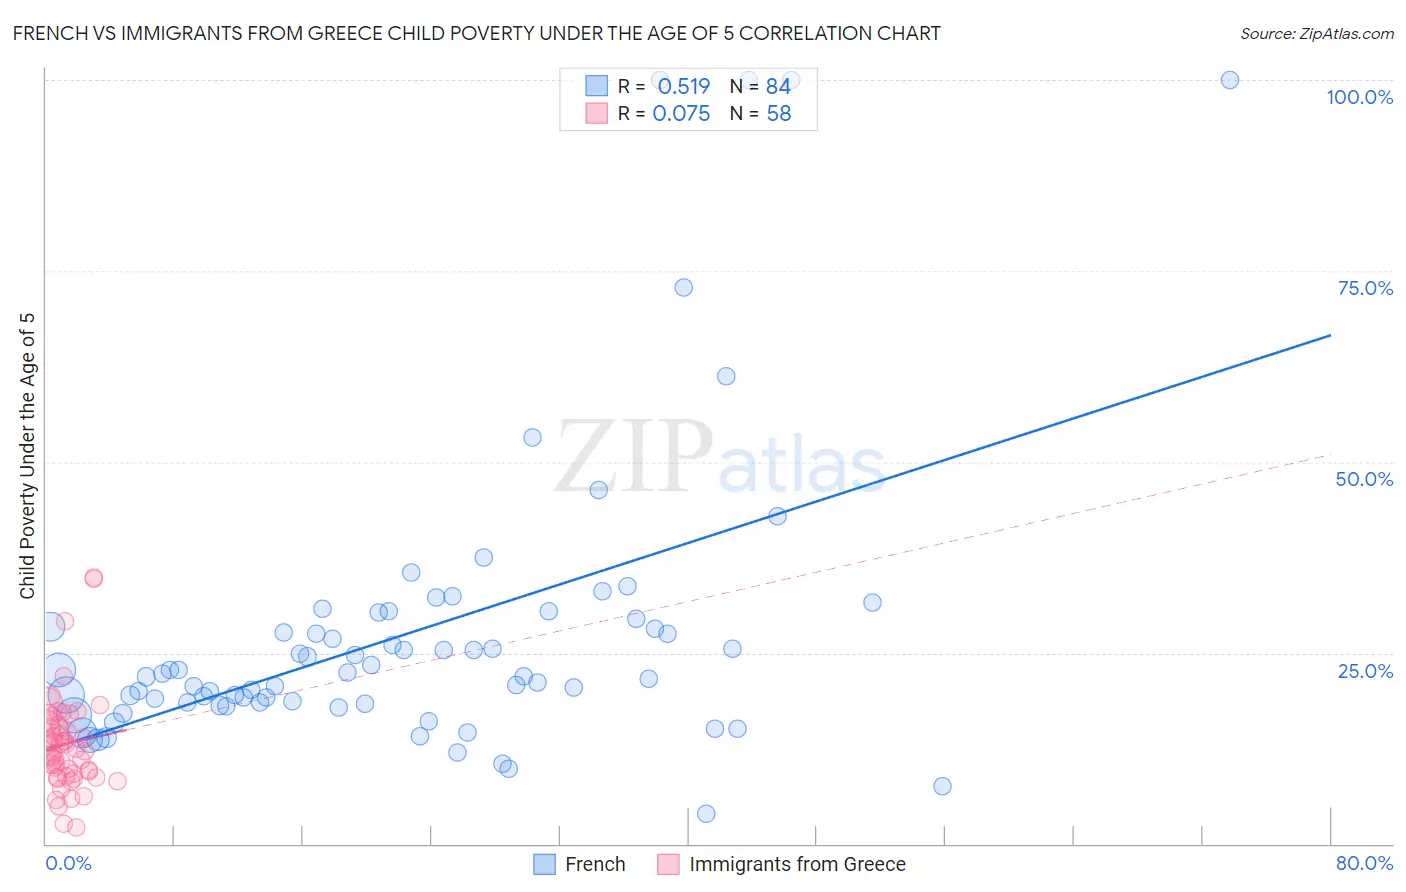 French vs Immigrants from Greece Child Poverty Under the Age of 5